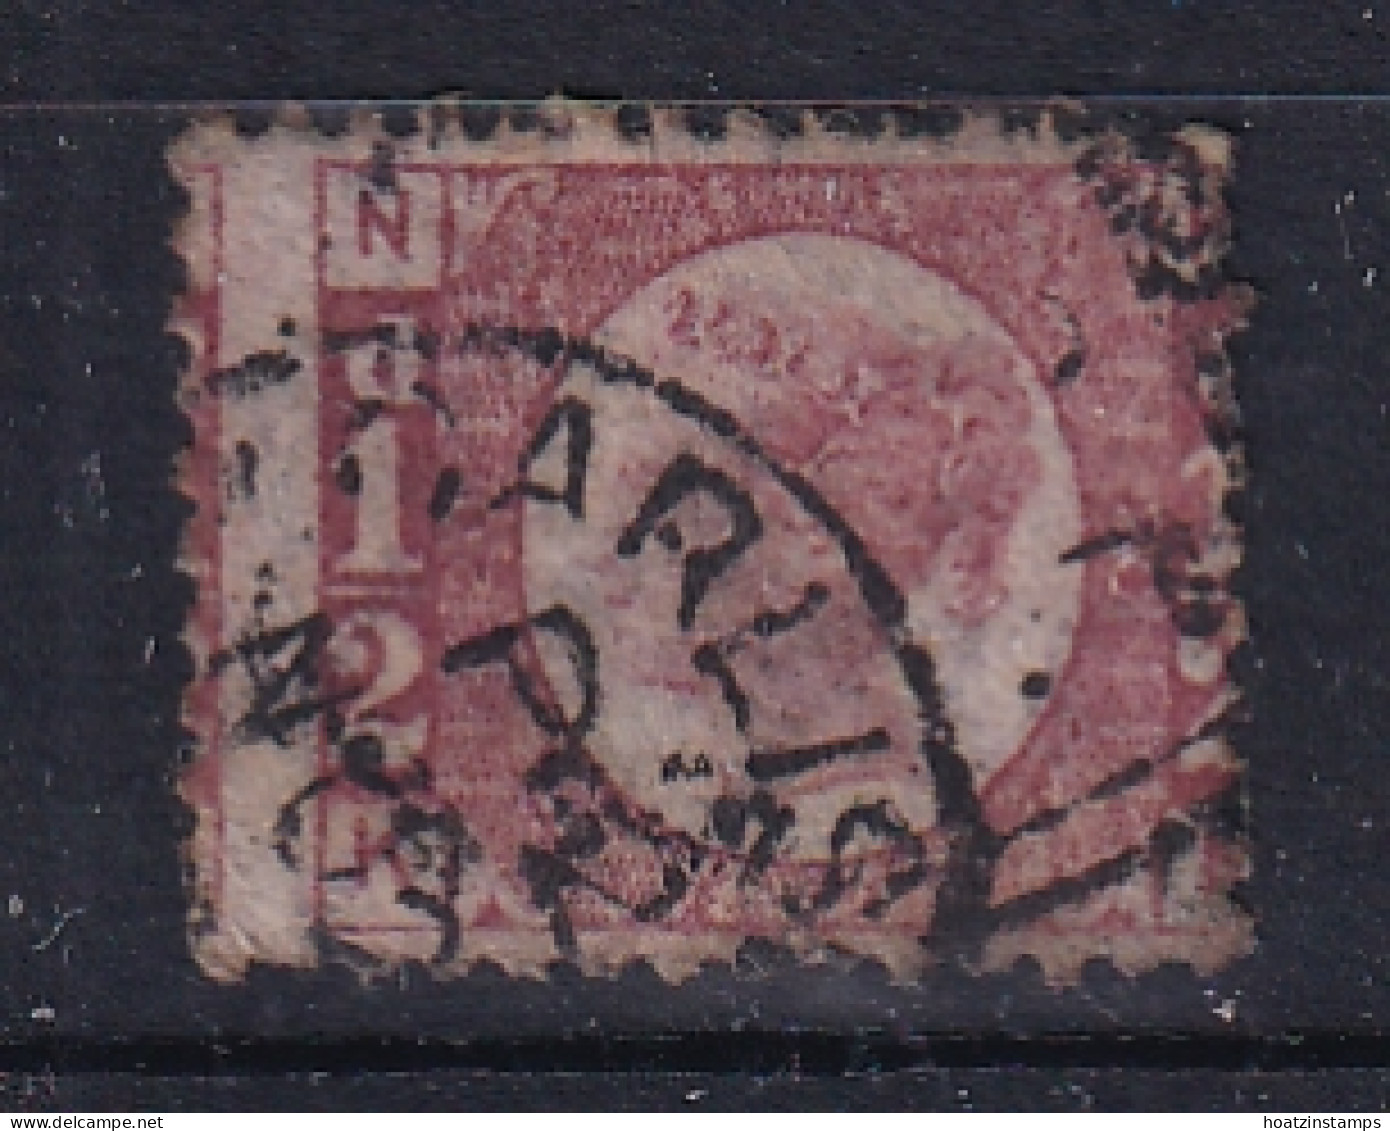 G.B.: 1870/79   QV   ½d    [Plate 20]   Used - Used Stamps